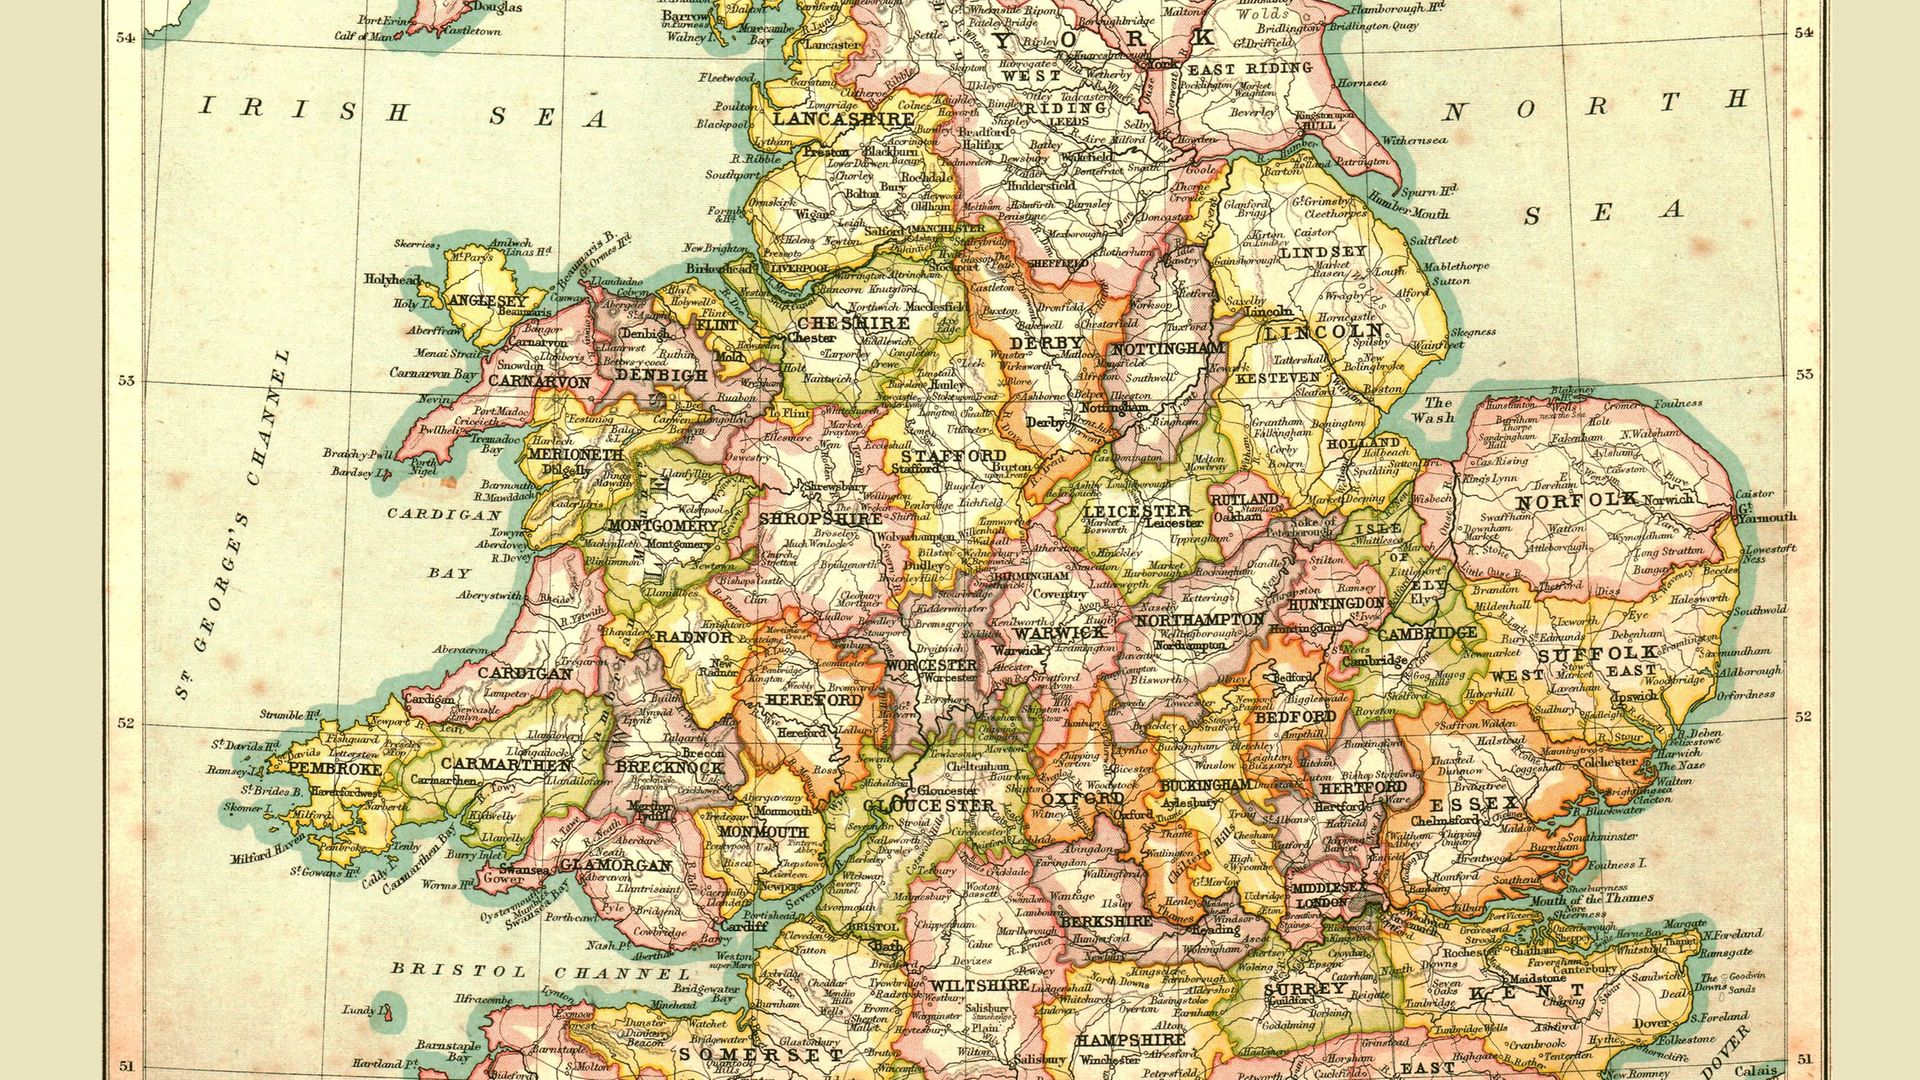 A map of England and Wales from 1902 showing historic counties - Credit: Getty Images